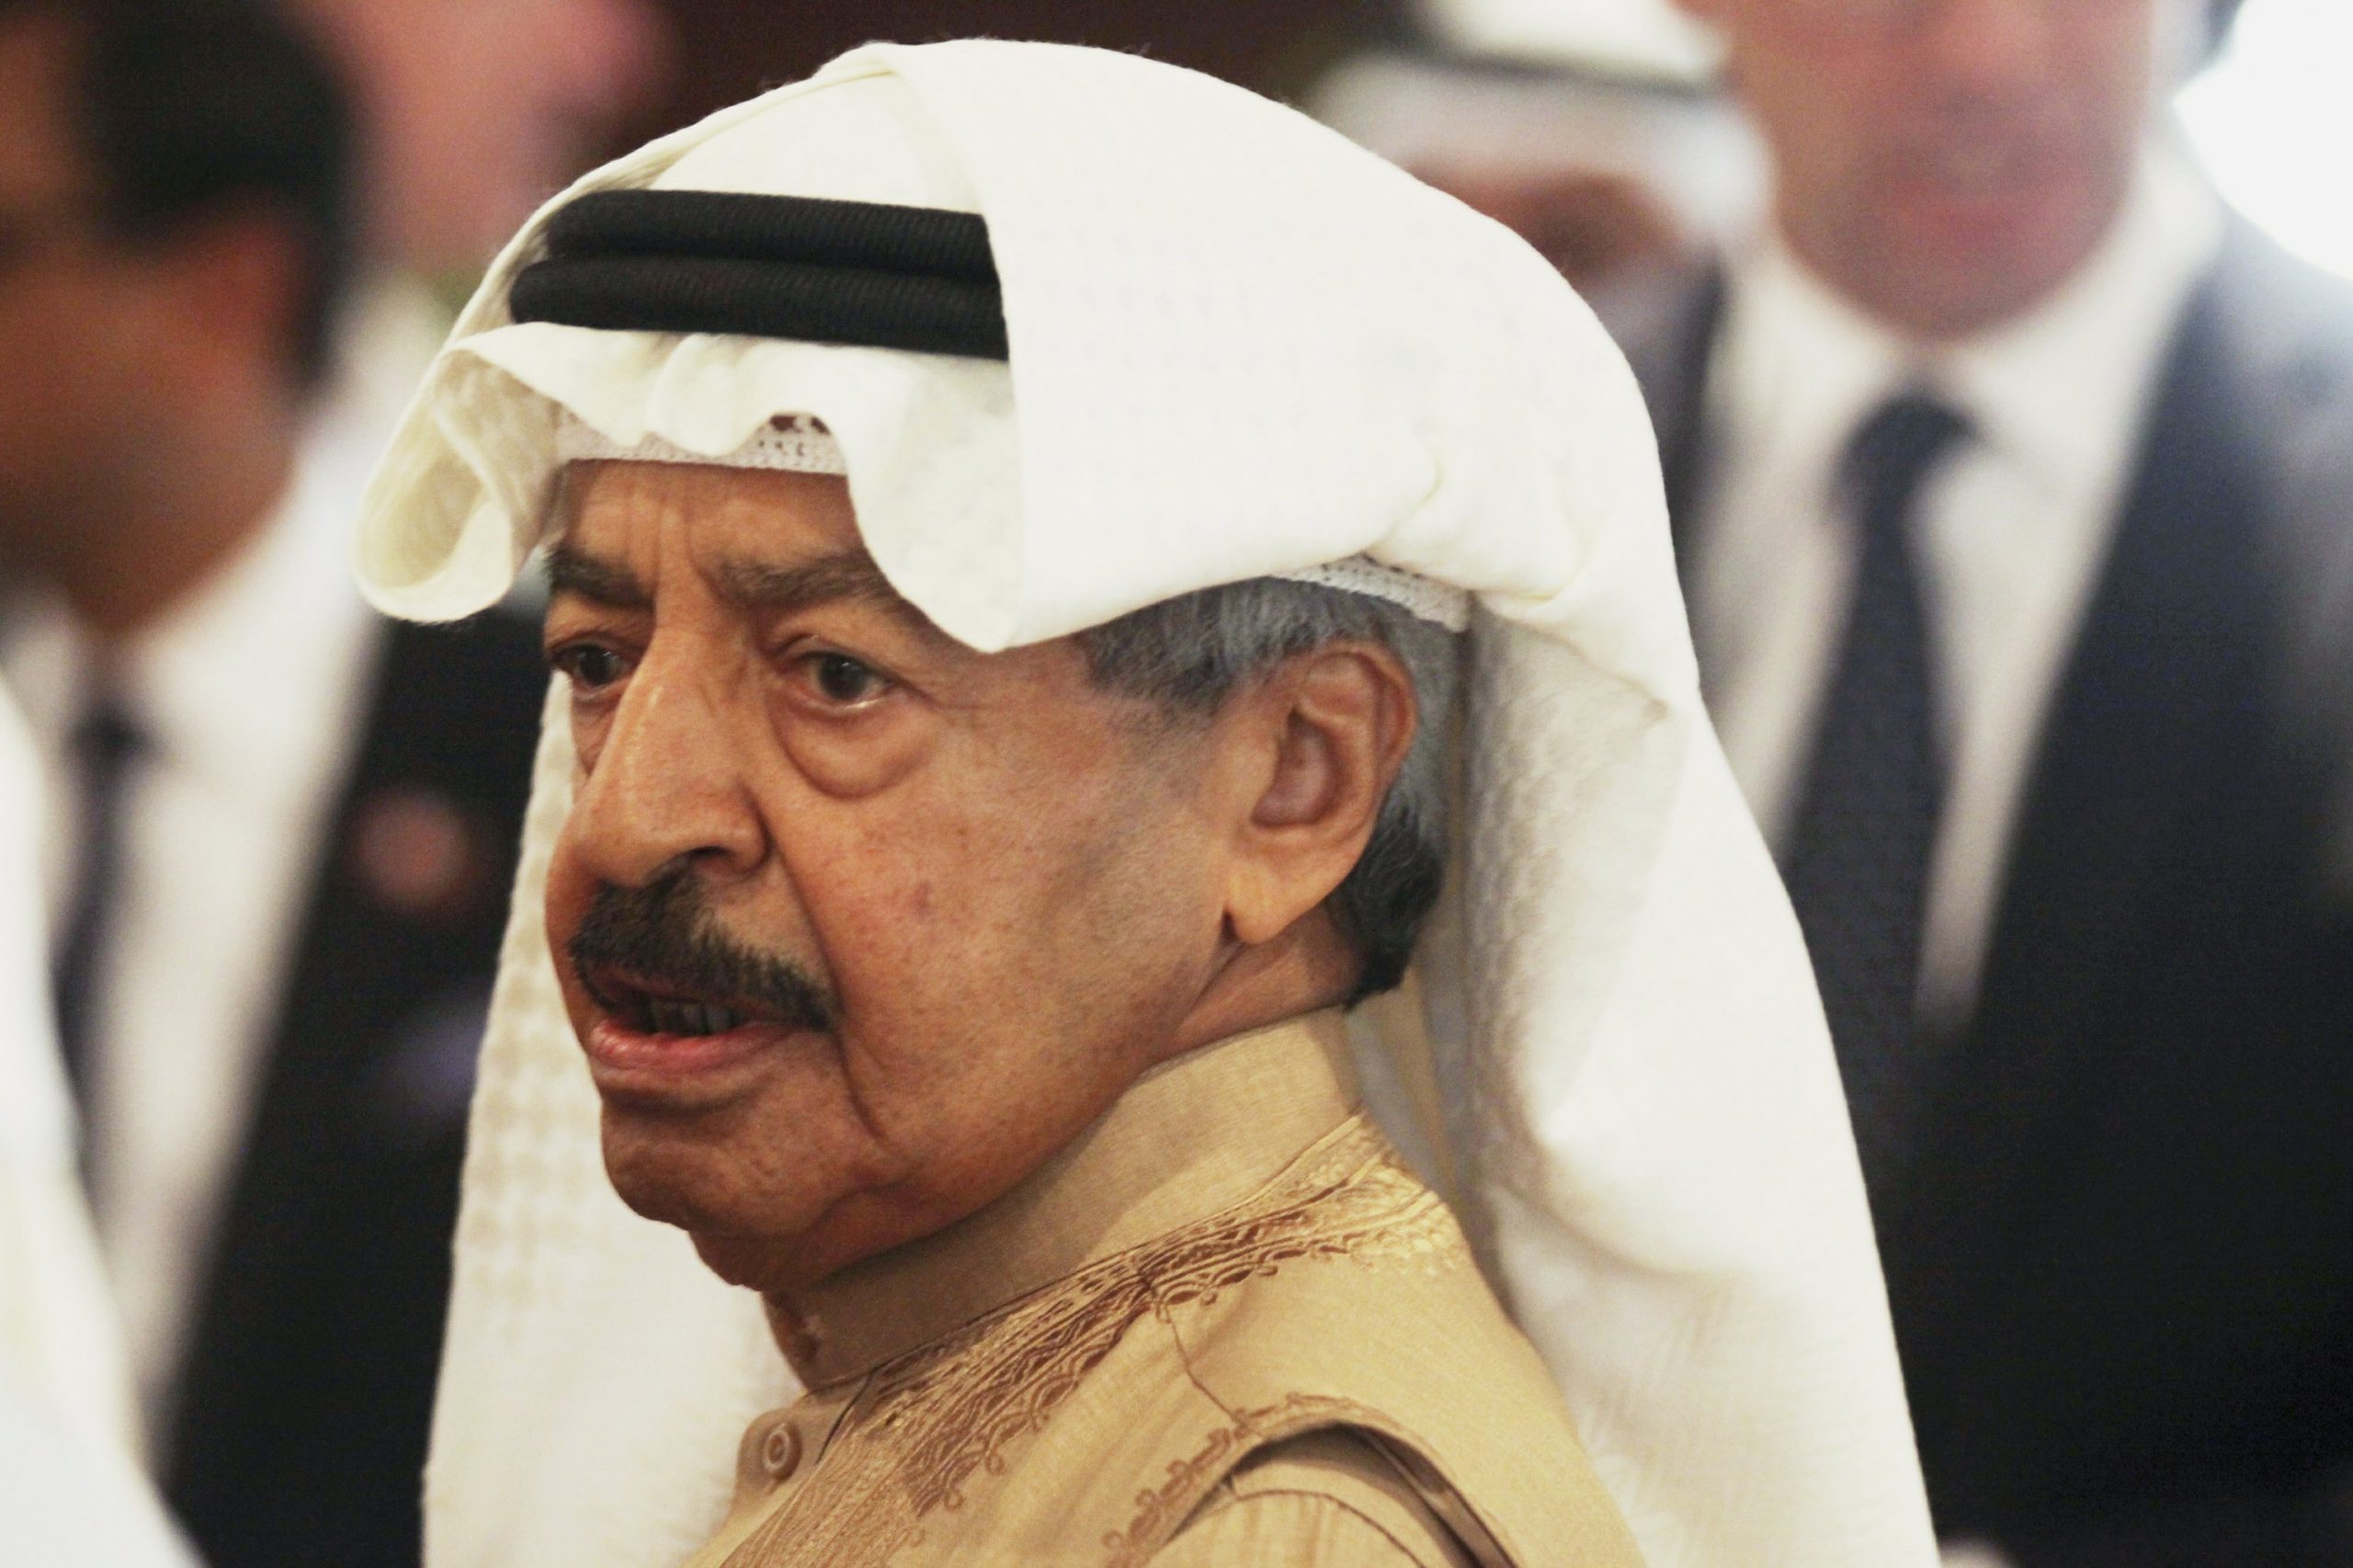 Bahrain's long-serving prime minister has died at the age of 84